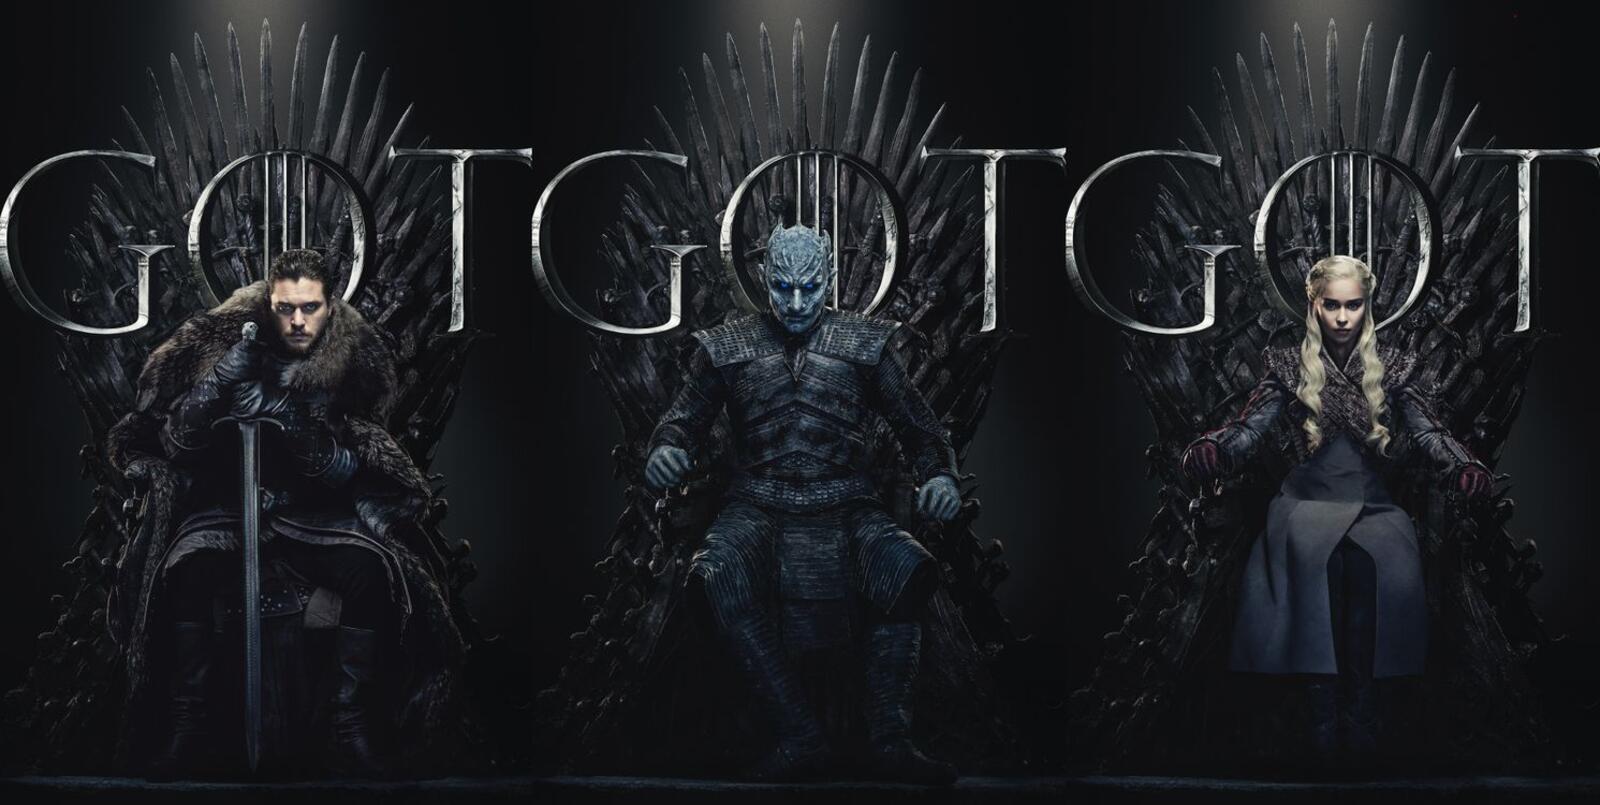 Wallpapers King of the night Game of thrones season 8 on the desktop